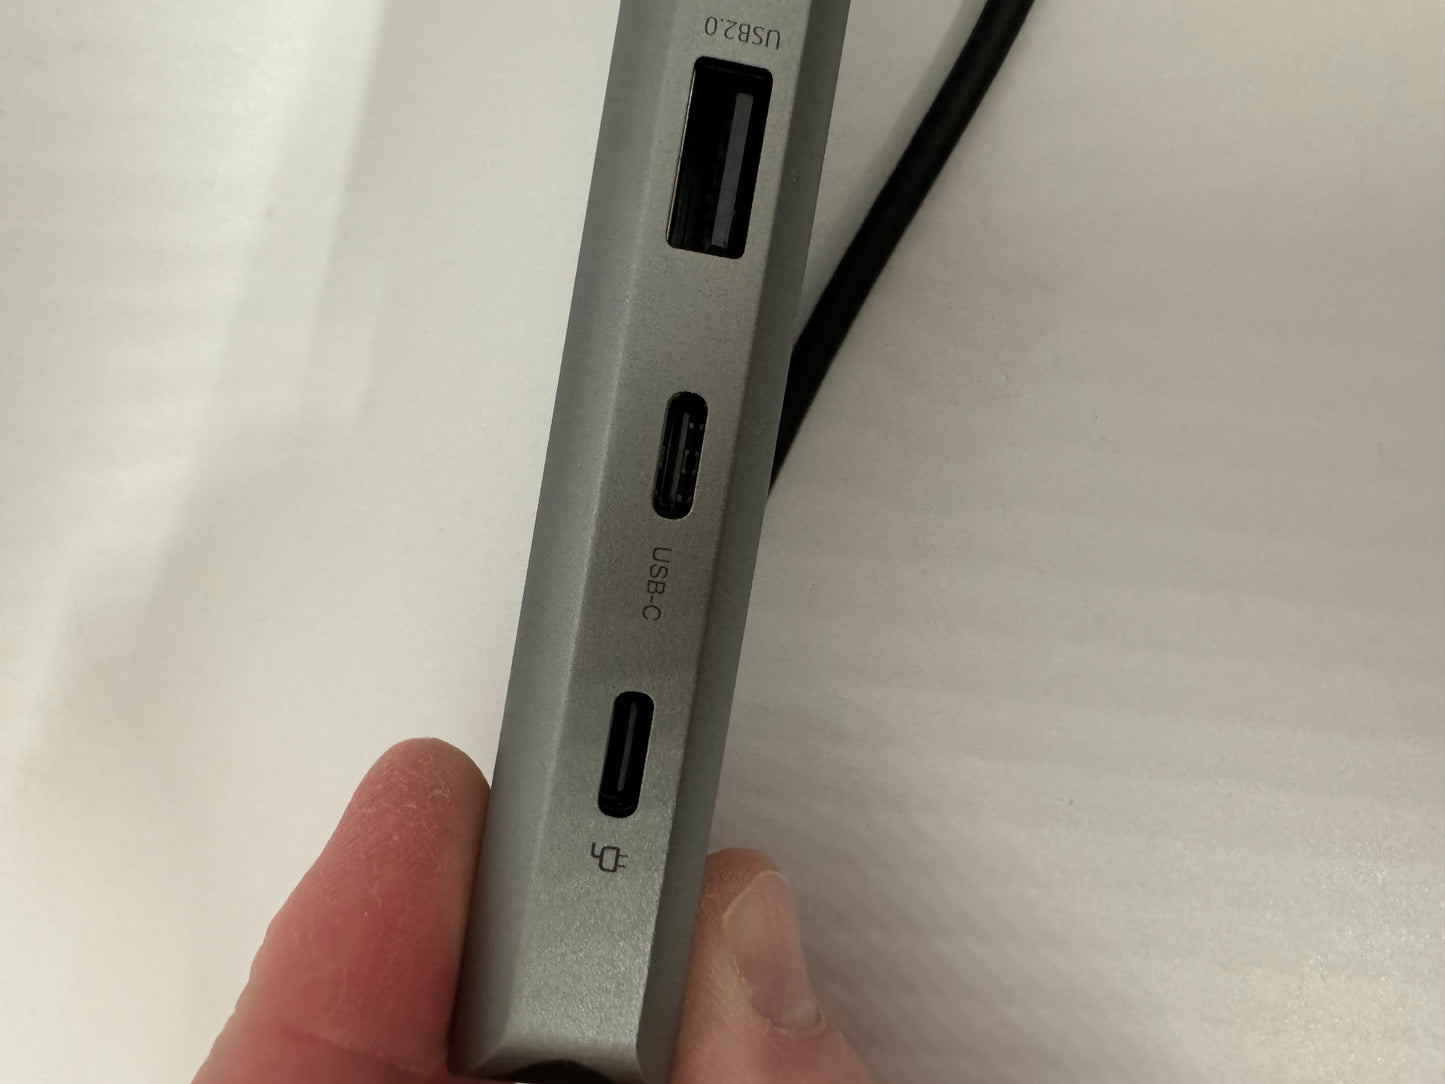 The picture shows a close-up of the side of a silver electronic device, possibly a laptop or a hub. There are two ports visible on the side of the device. The top port is labeled "USB-C" and has a cable plugged into it. The bottom port is smaller and has a symbol next to it that looks like a display monitor. The device is being held by someone's hand, with their thumb visible at the bottom of the picture. The background is a plain white surface.